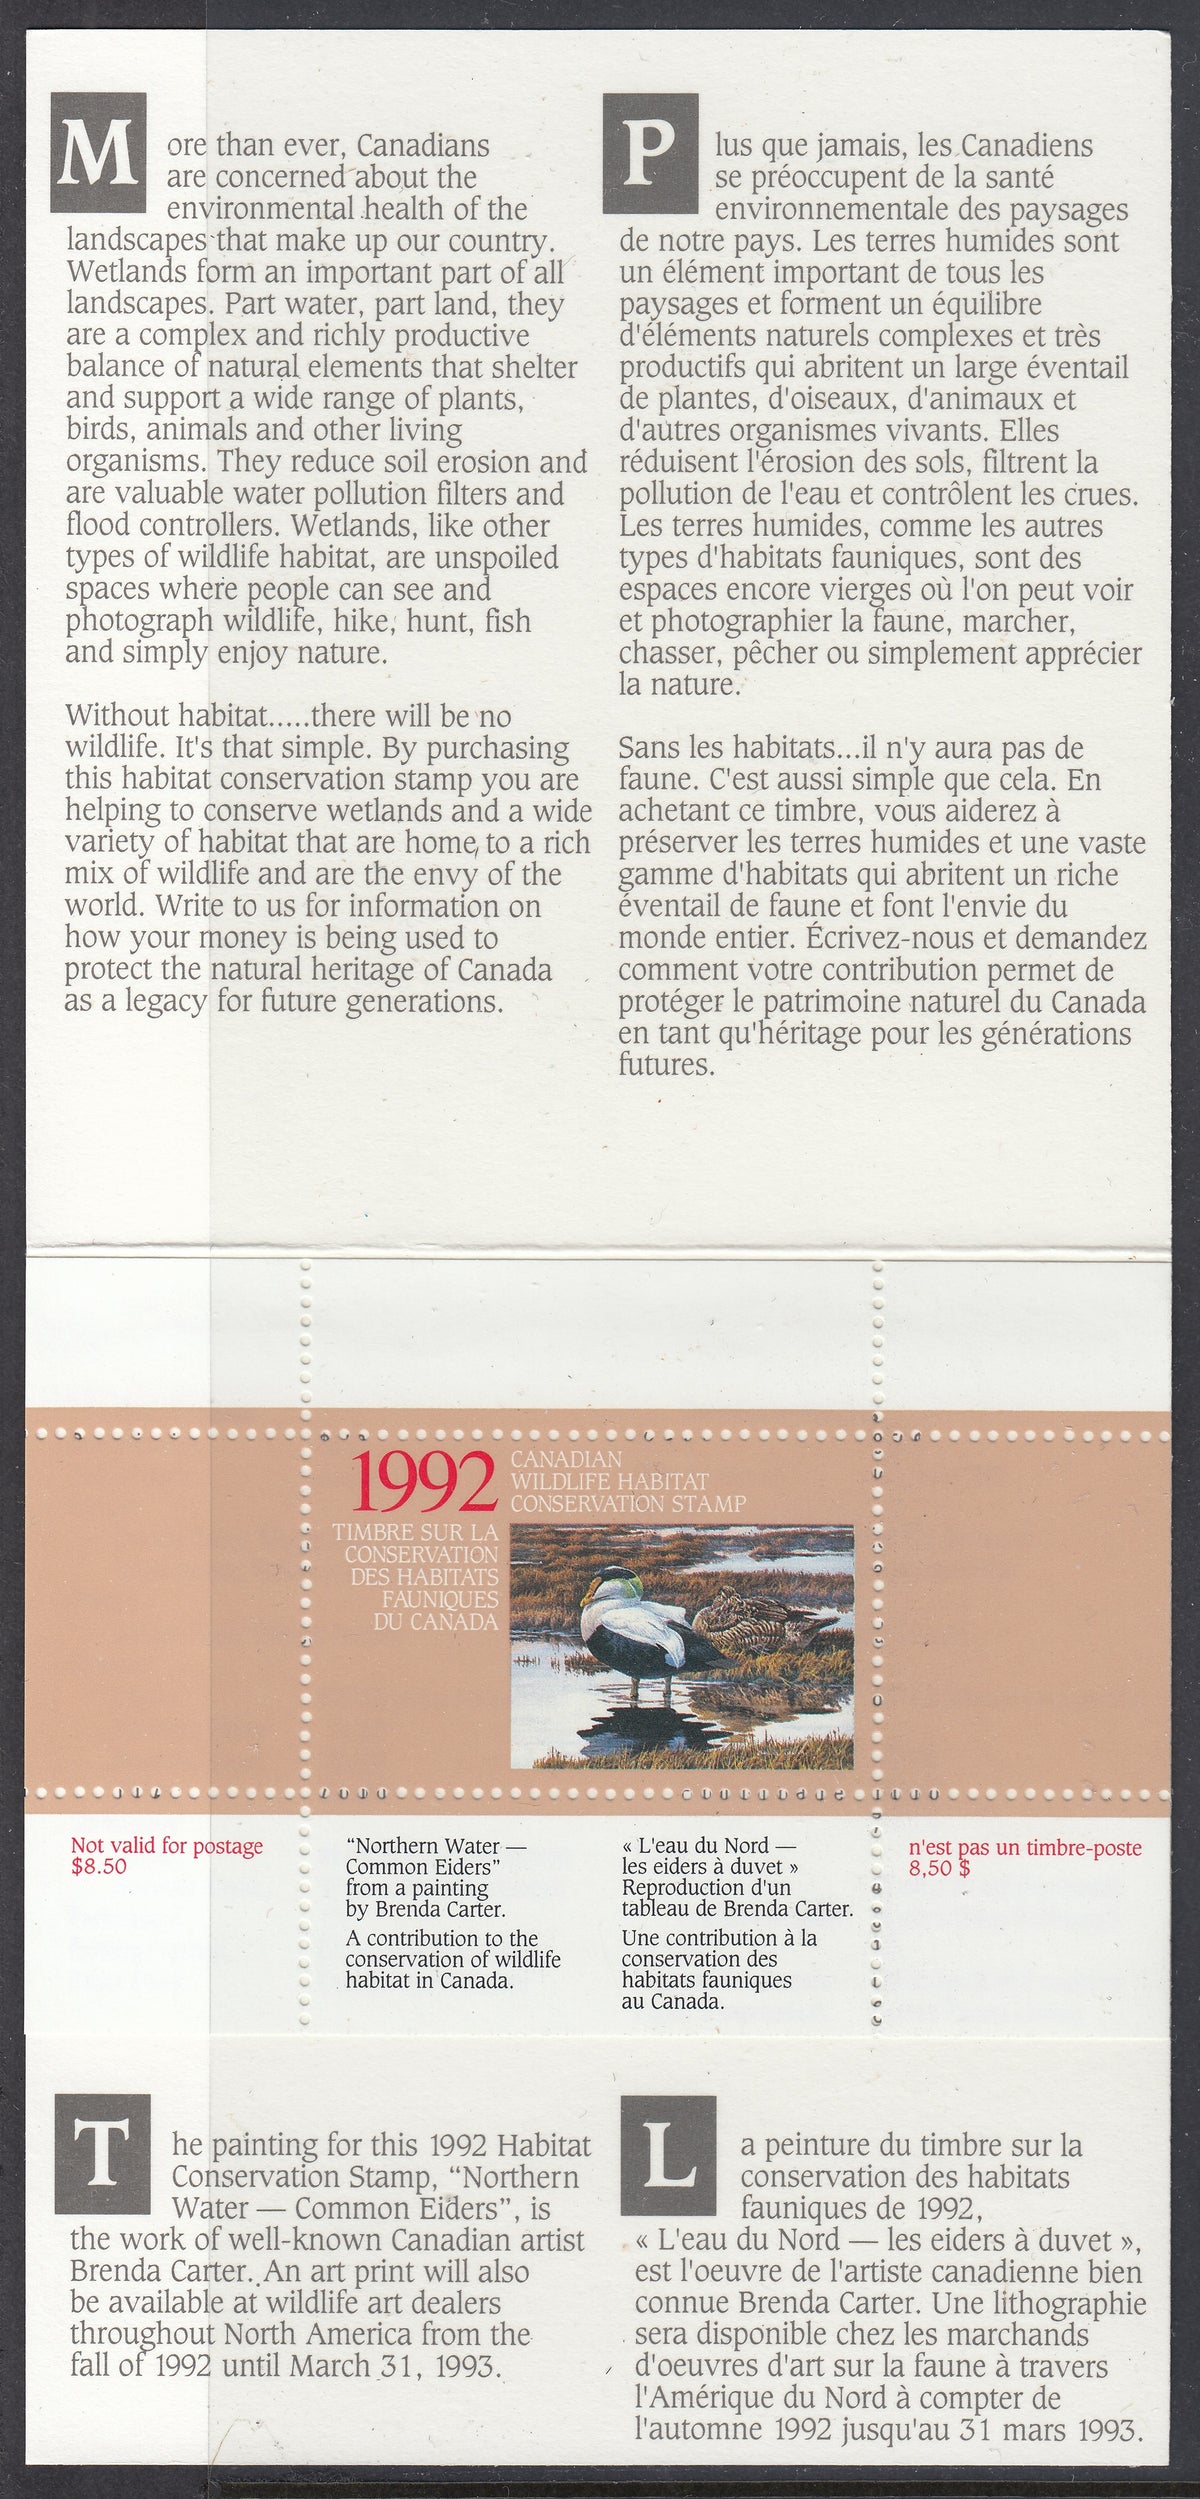 0008FW2105 - FWH8 - Mint in Booklet